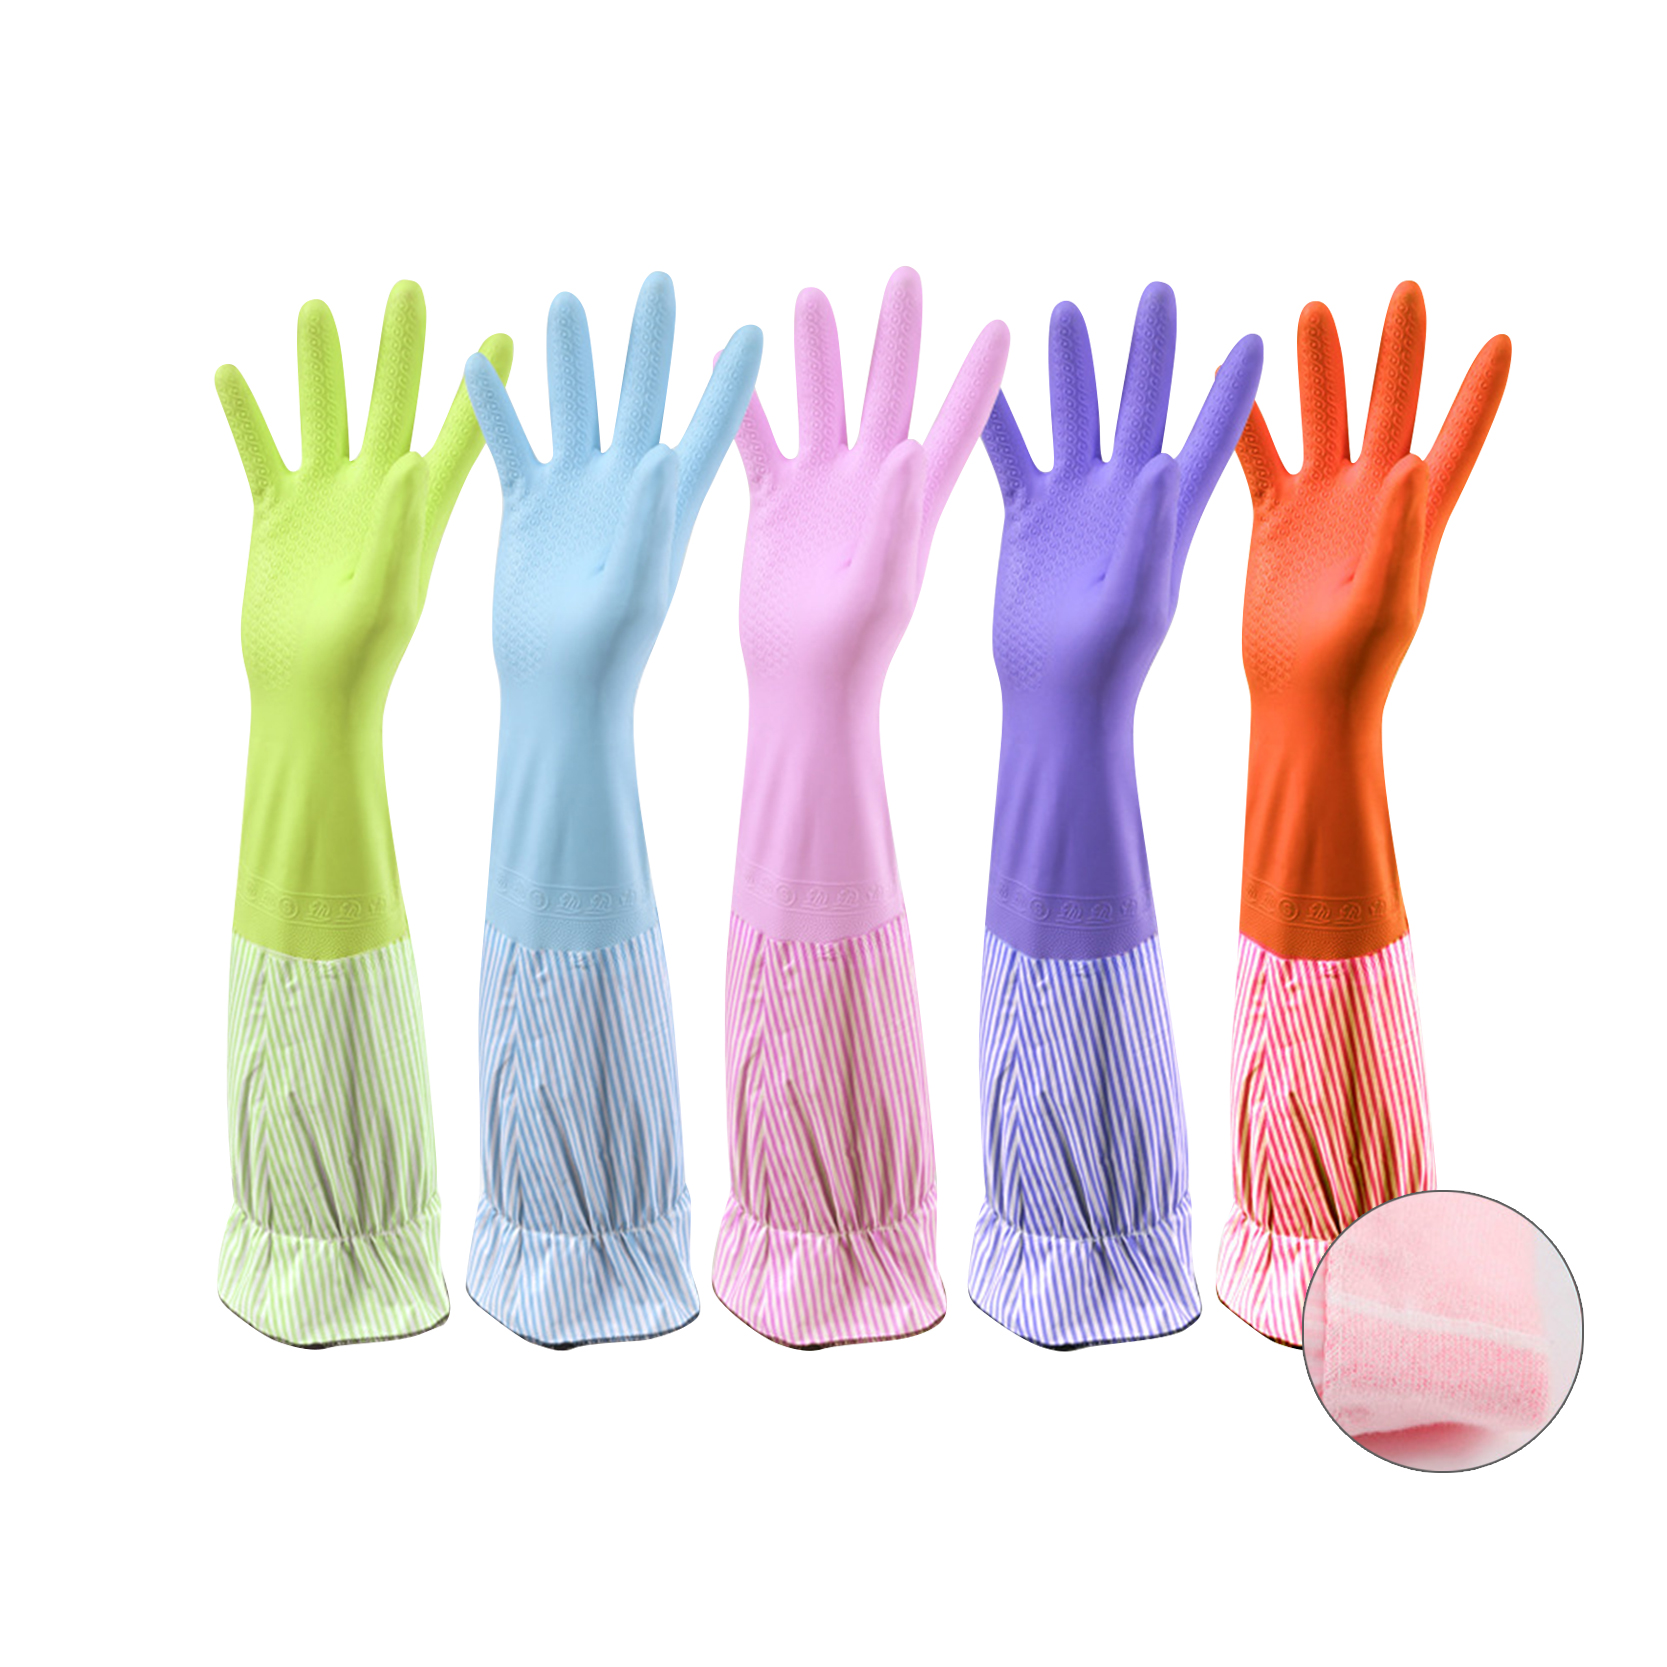 Rubber PVC Gloves Clean Long Gloves Winter Work Safety Gloves Woman Clean Tool Waterproof Dishwashing Household Gloves